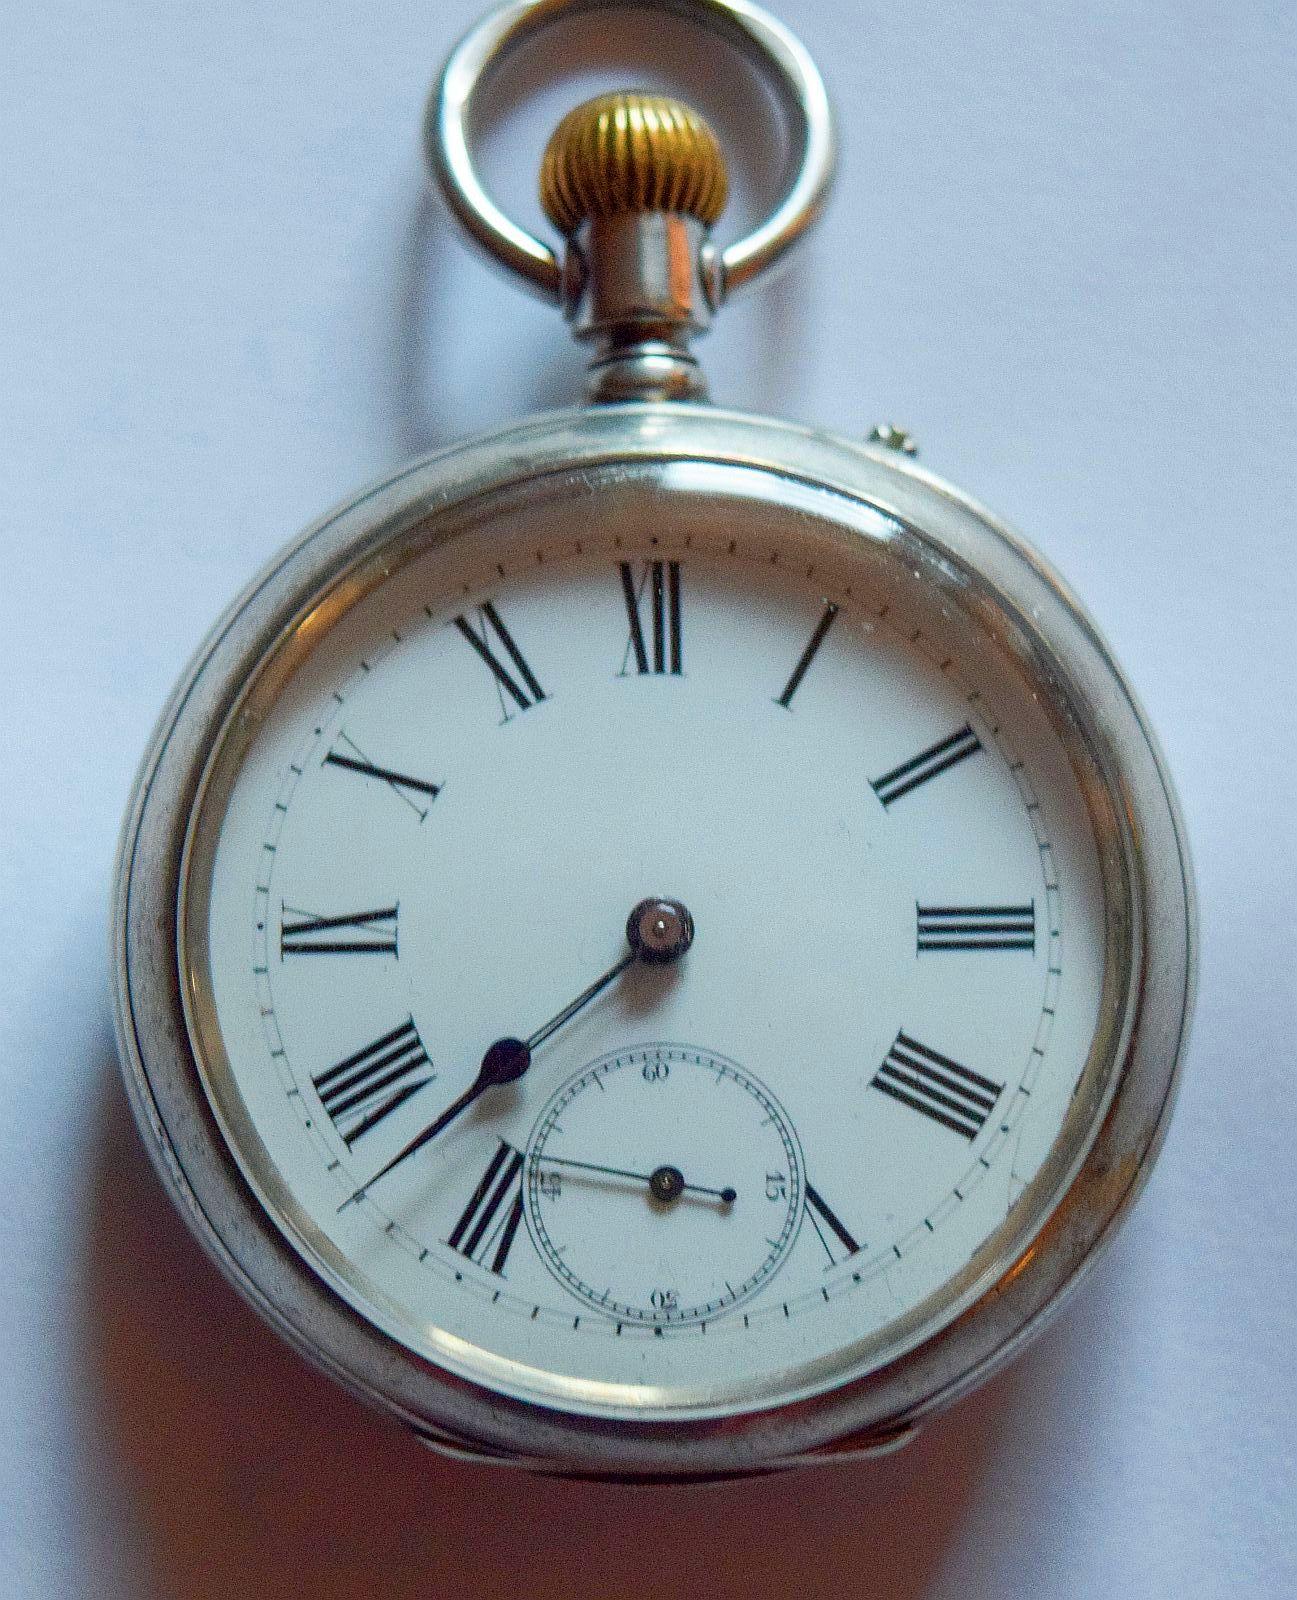 Lovely English Silver open face pocket watch in great condition.
Top winder.
Double back.
Great silver case with minor small dents due to age.
Lovely dial with Roman numerals and with sub seconds at 6.
Blackened steel hands,
Movement is in lovevly